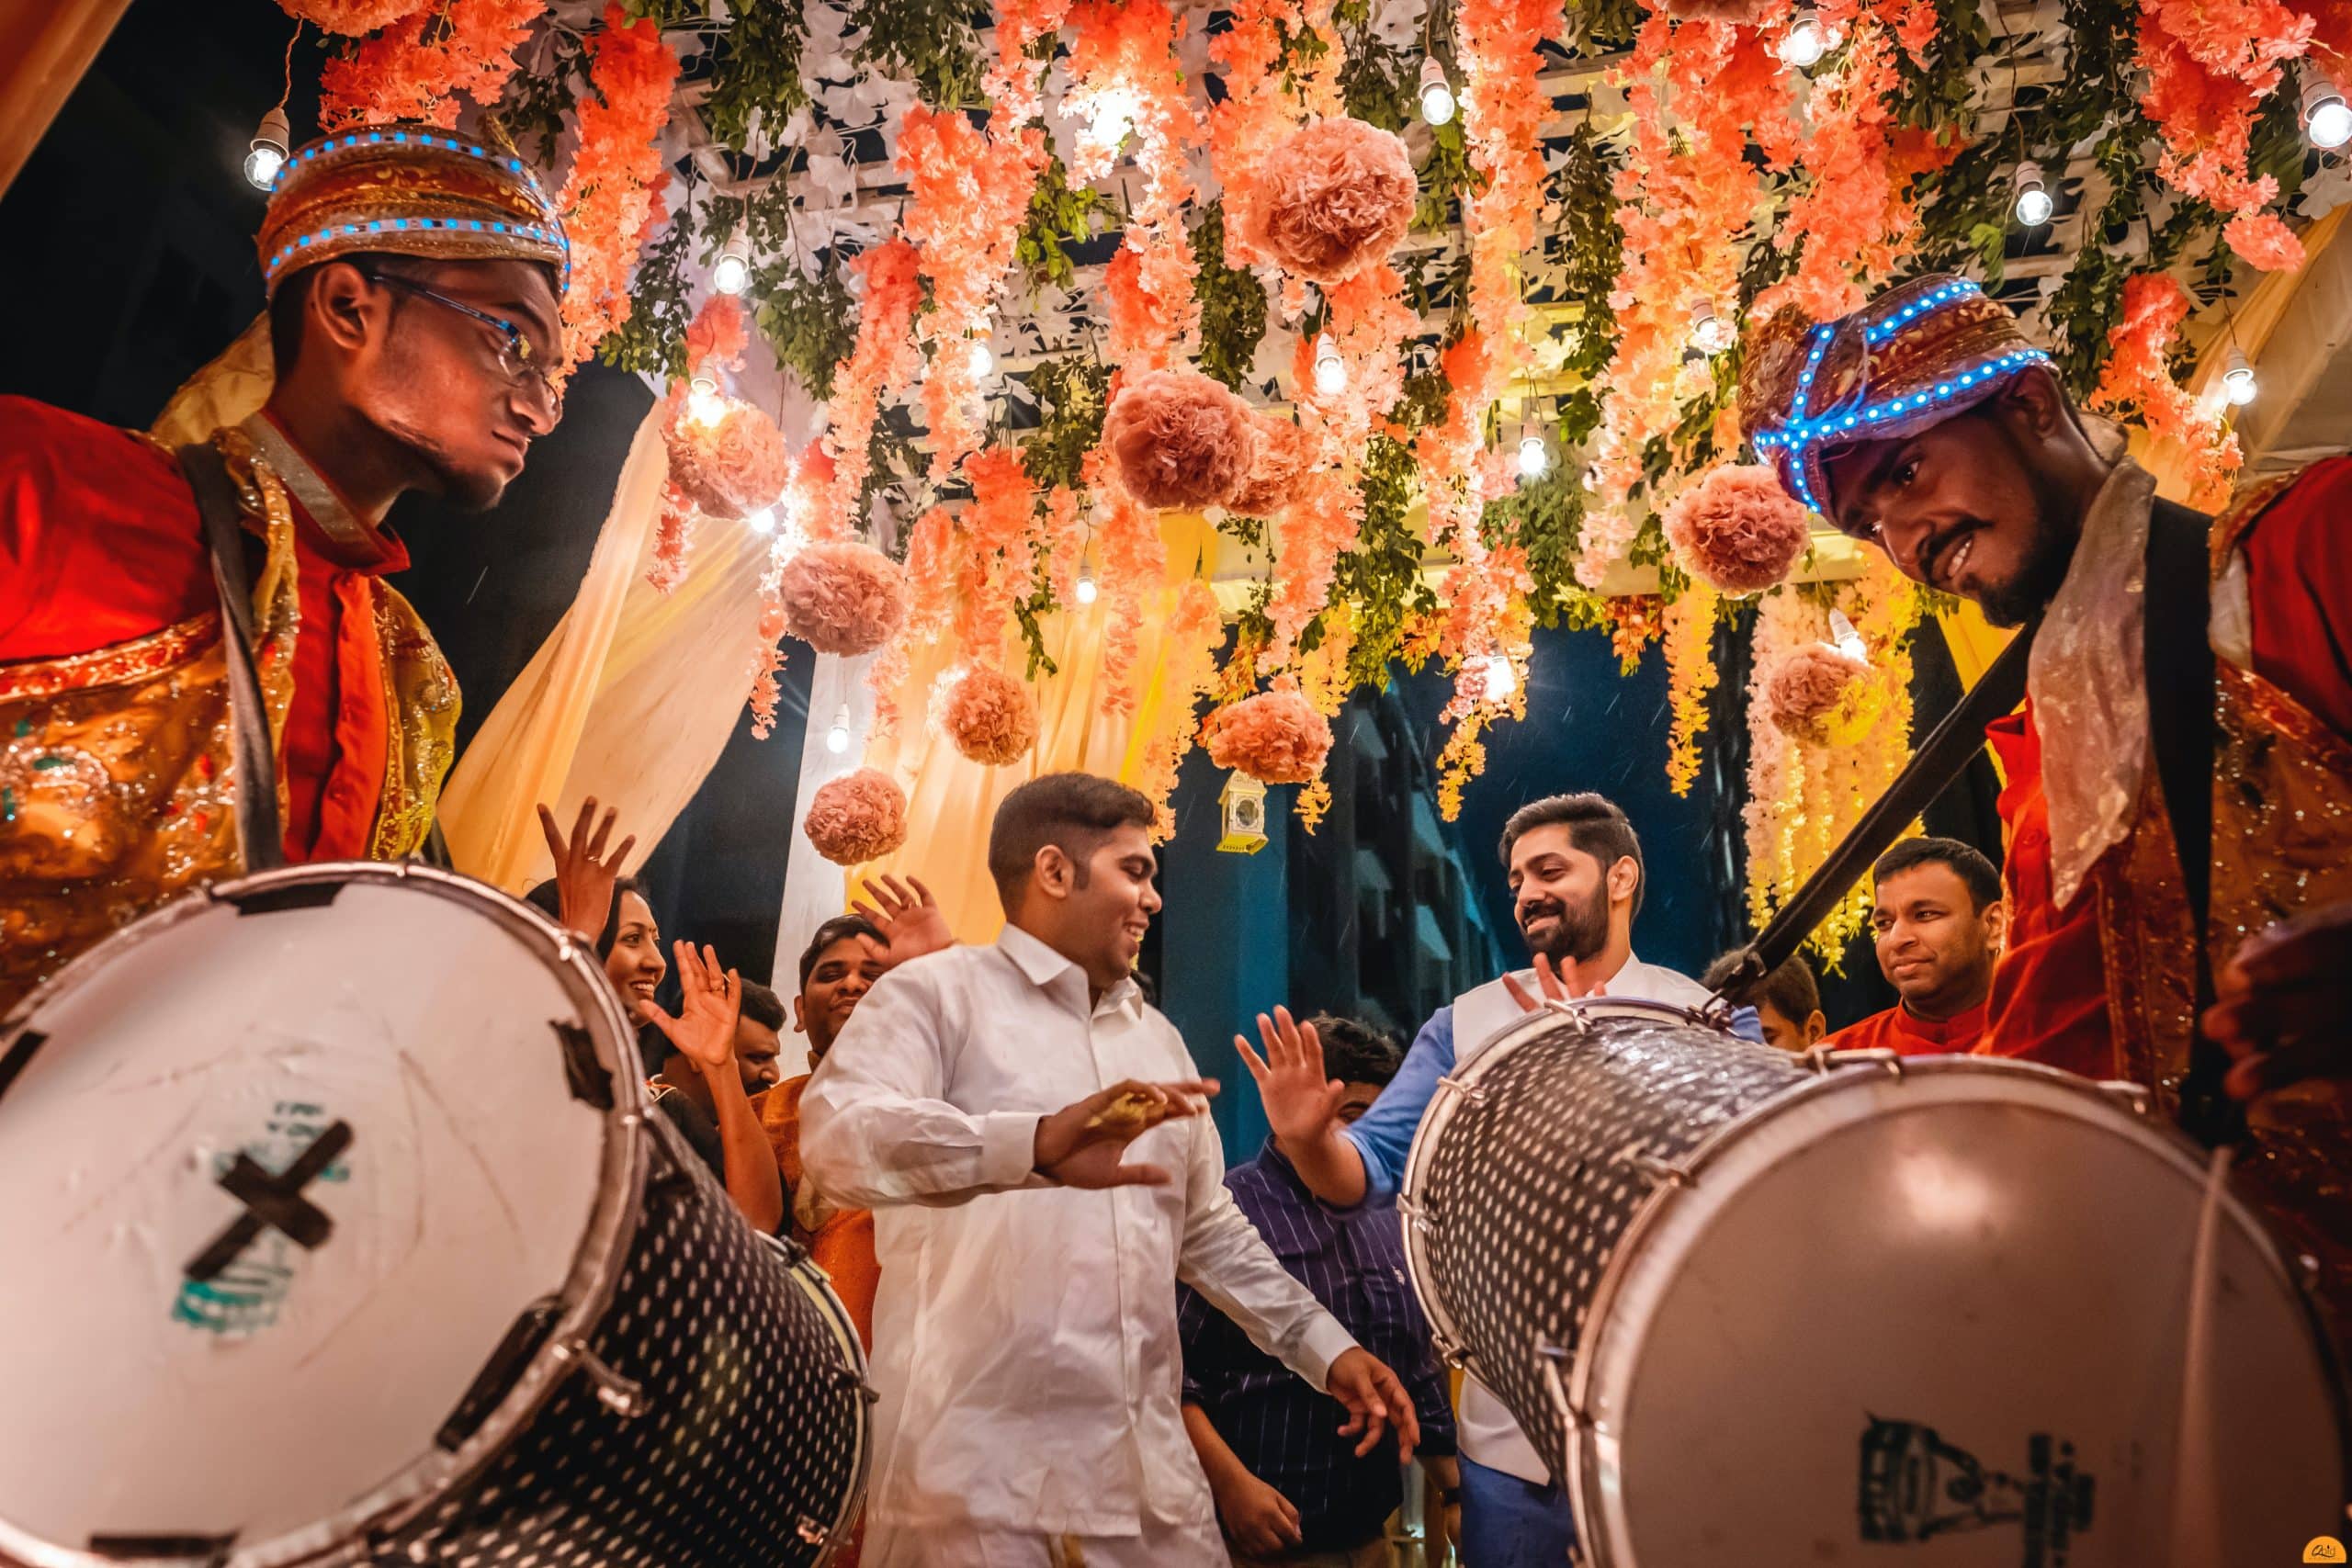 Men dance with drum players at an Indian destination wedding.